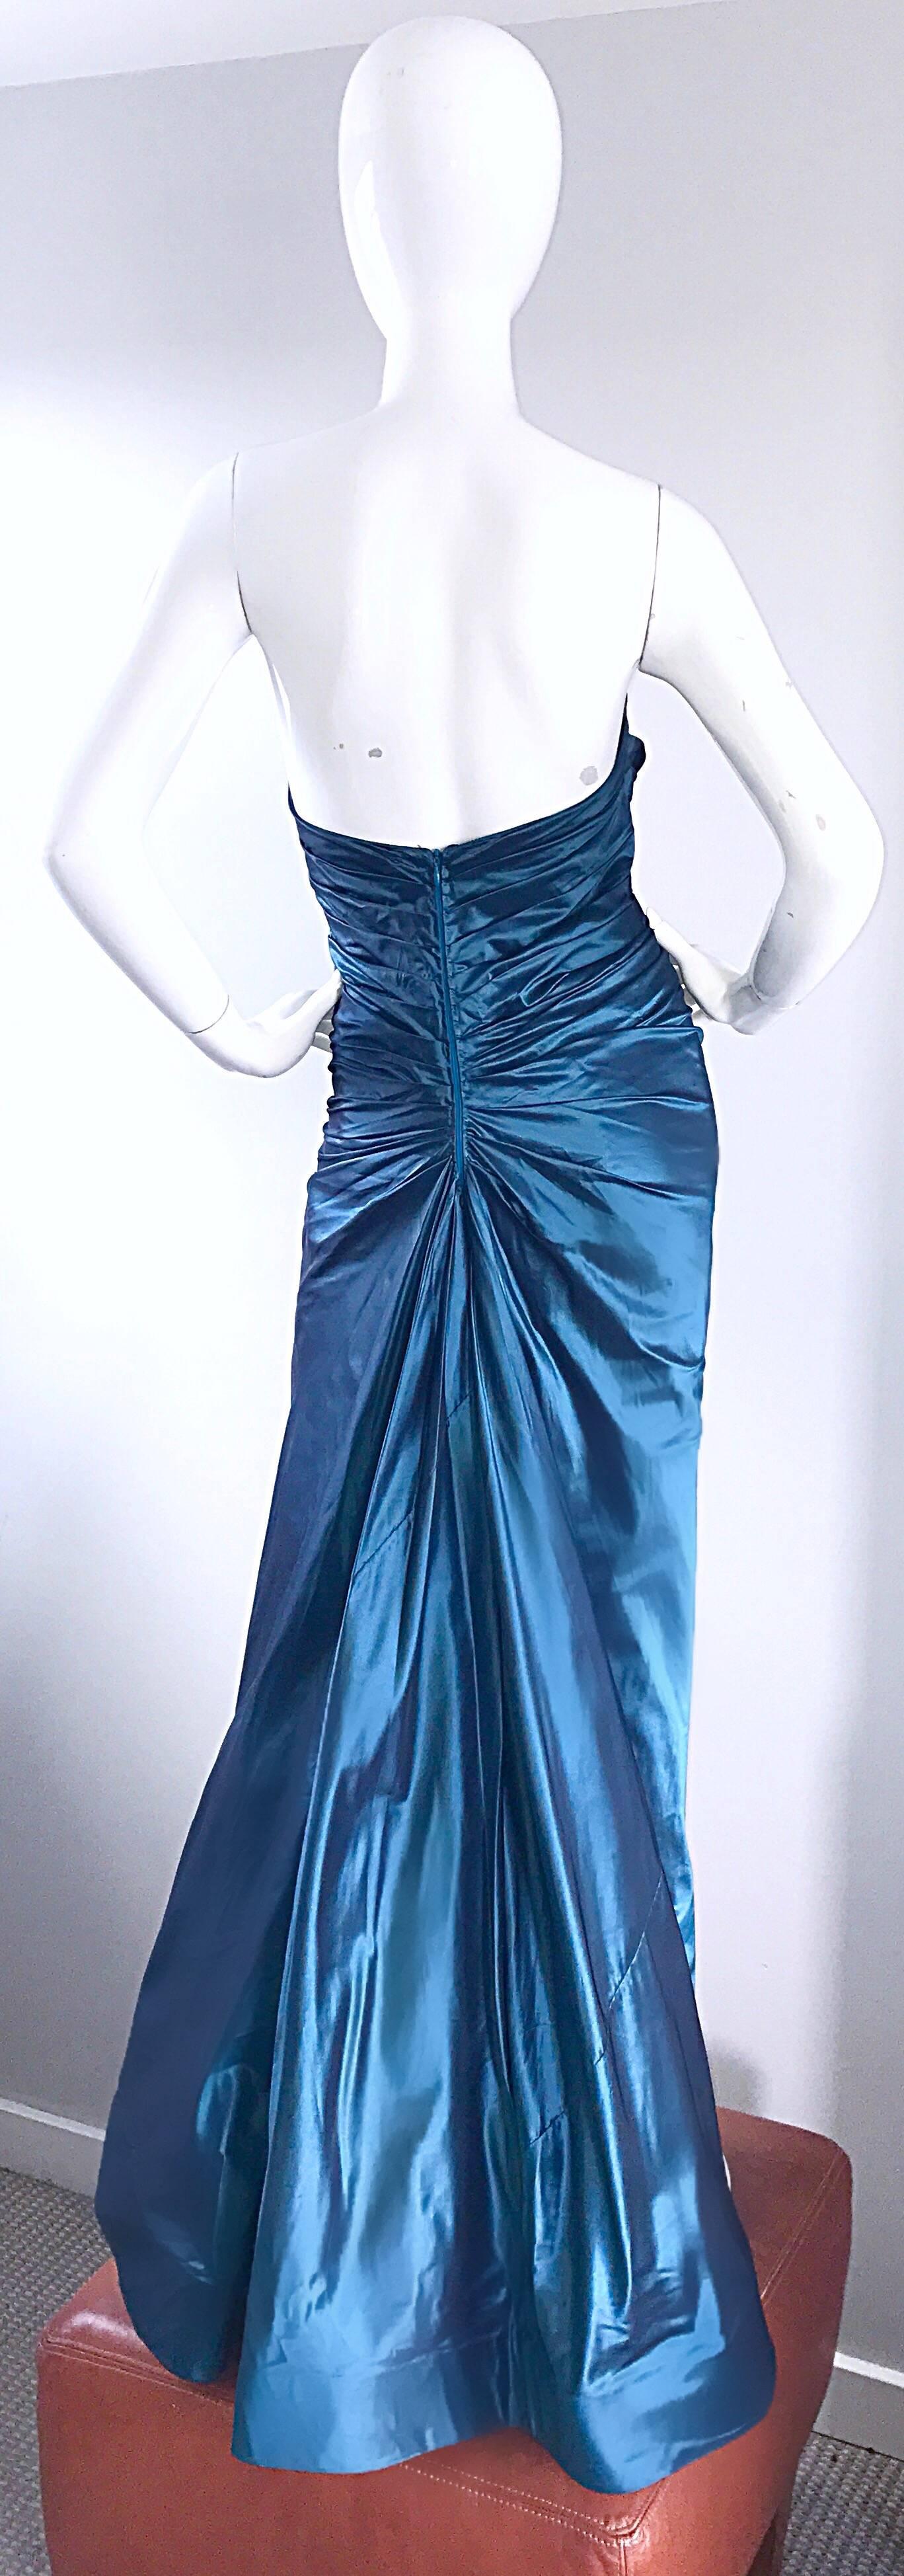 Exceptional vintage RONALD NIVELAIS for BERGDORF GOODMAN strapless blue silk taffeta gown! Flattering ruching detail hides any flaws. Dramatic back, with drapes and pleats. Couture quality with so much attention to detail. Most of the work was done